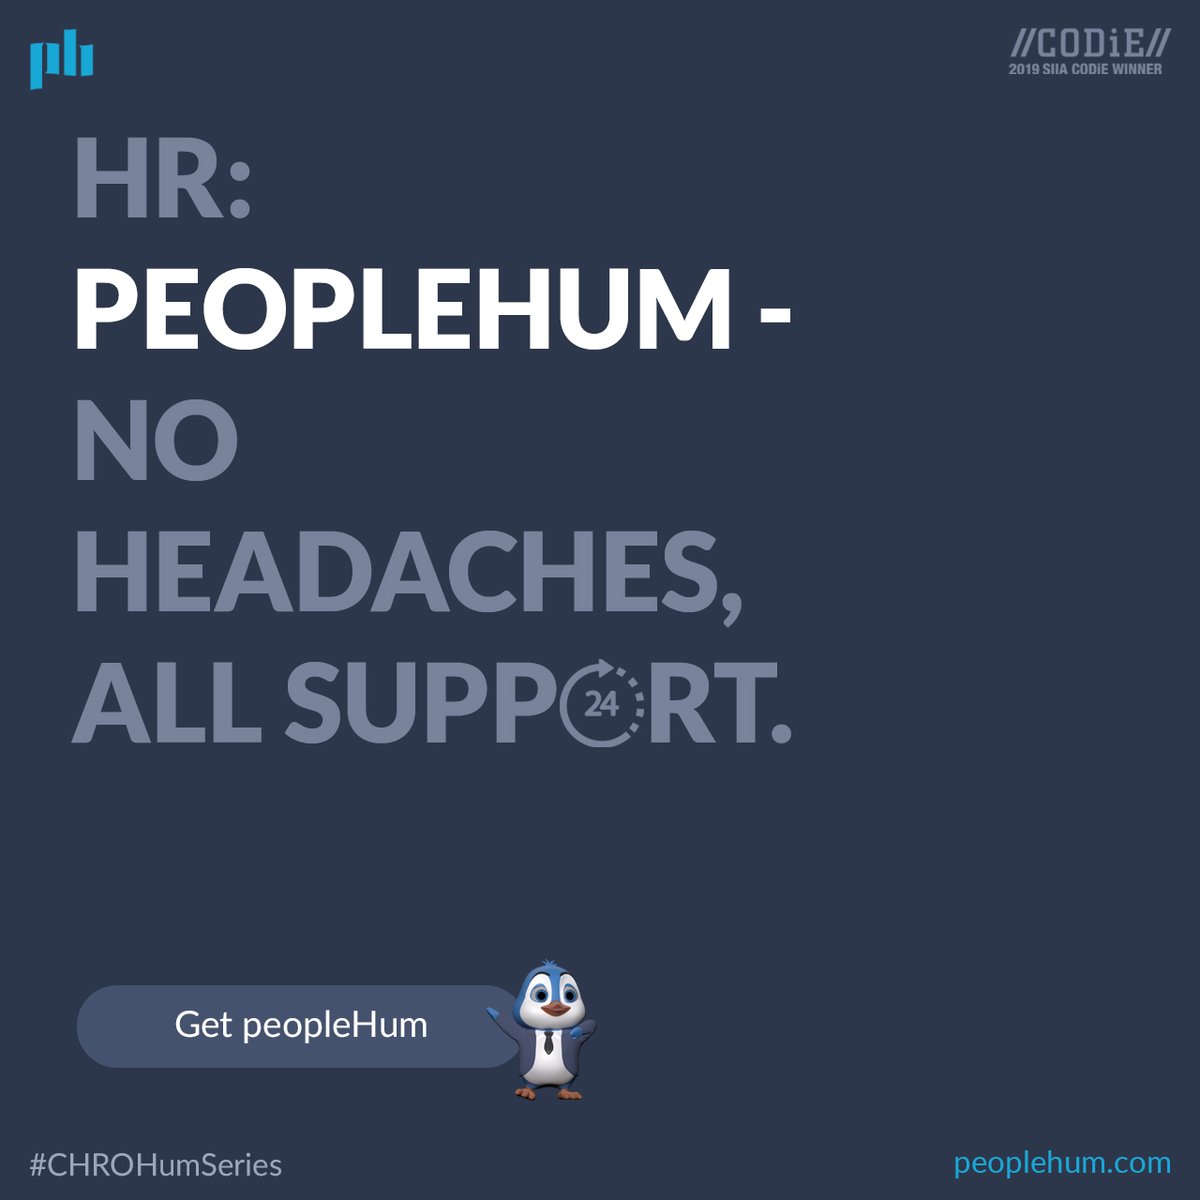 Ready for a smoother HR experience?
Schedule a demo today: s.peoplehum.com/z1hhf

#hr #hrcommunity #management #tech #techcommunity #workplaceinnovation #productivity #artificialintelligence #ai #business #usa #washington #newyork #losangeles #Chicago